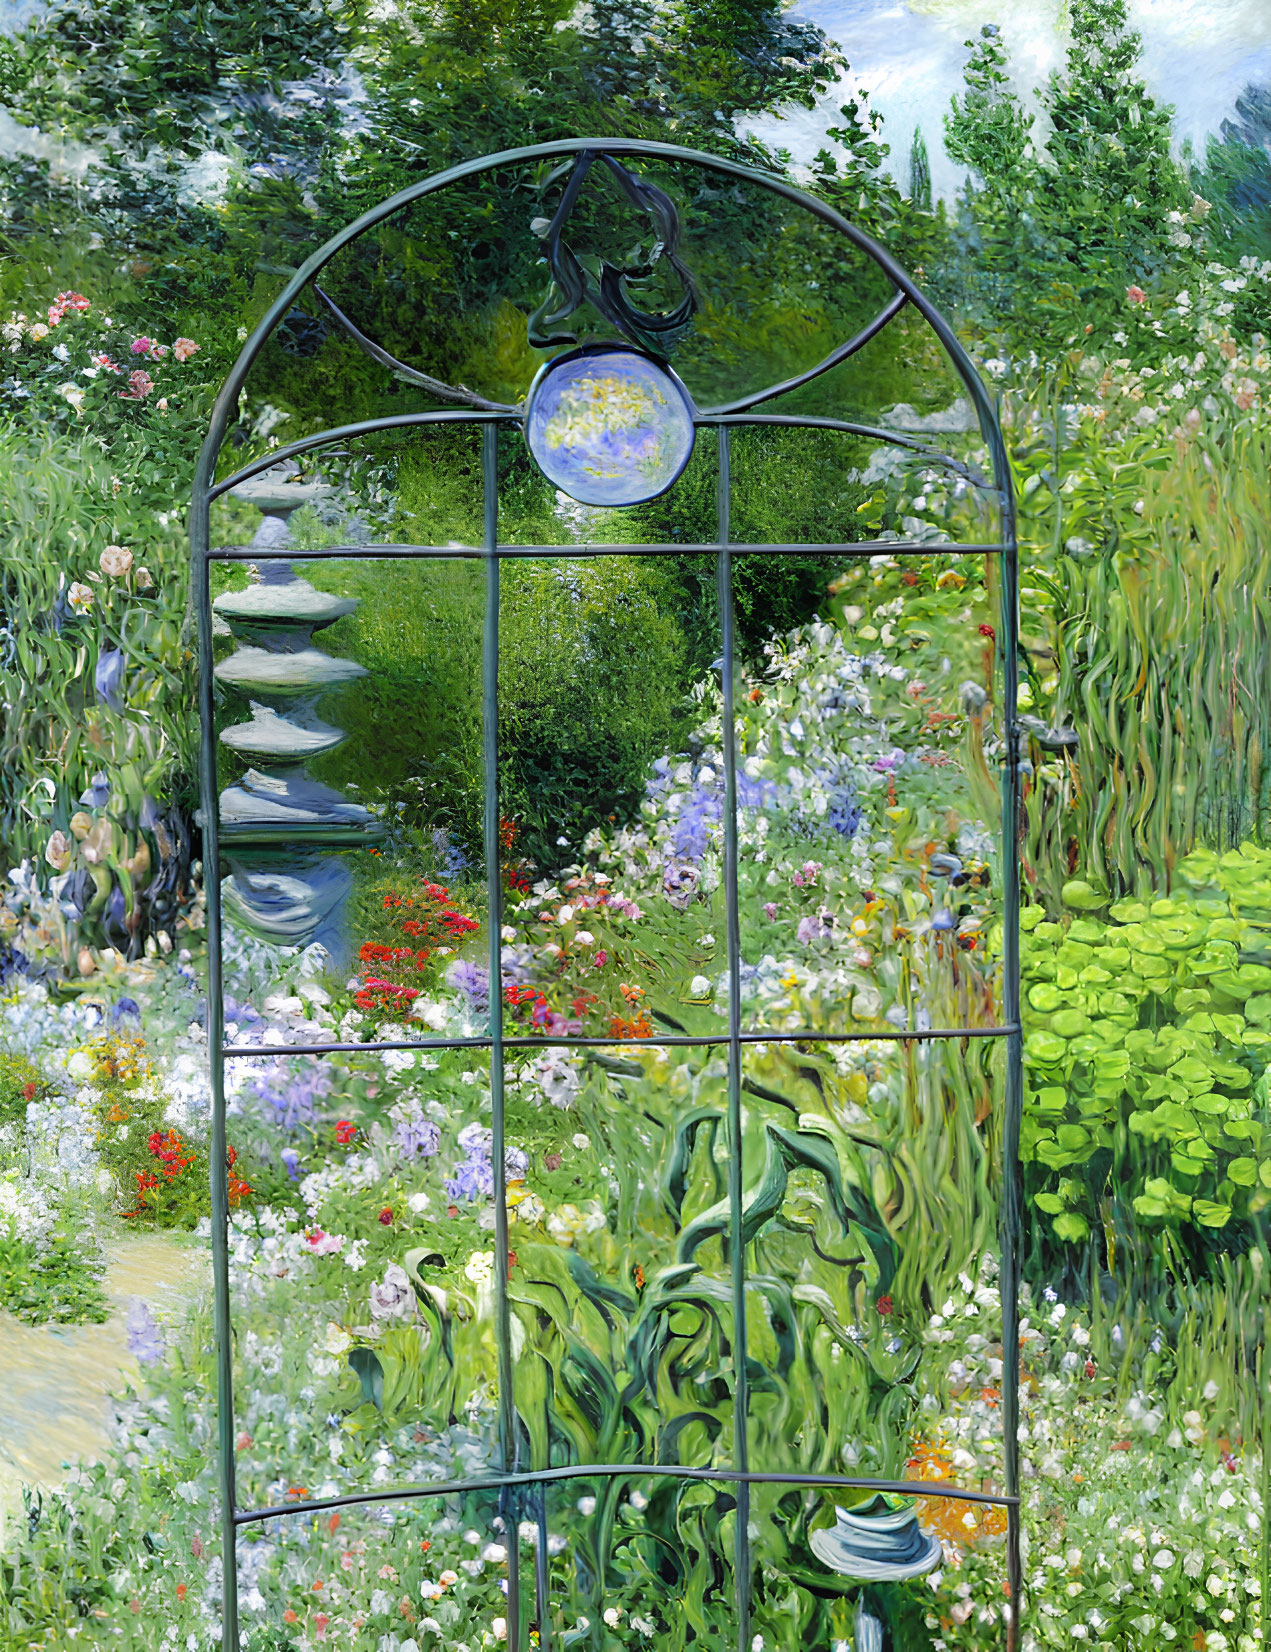 Colorful garden painting seen through ornate metal gate with lush greenery, flowers, and blue sky